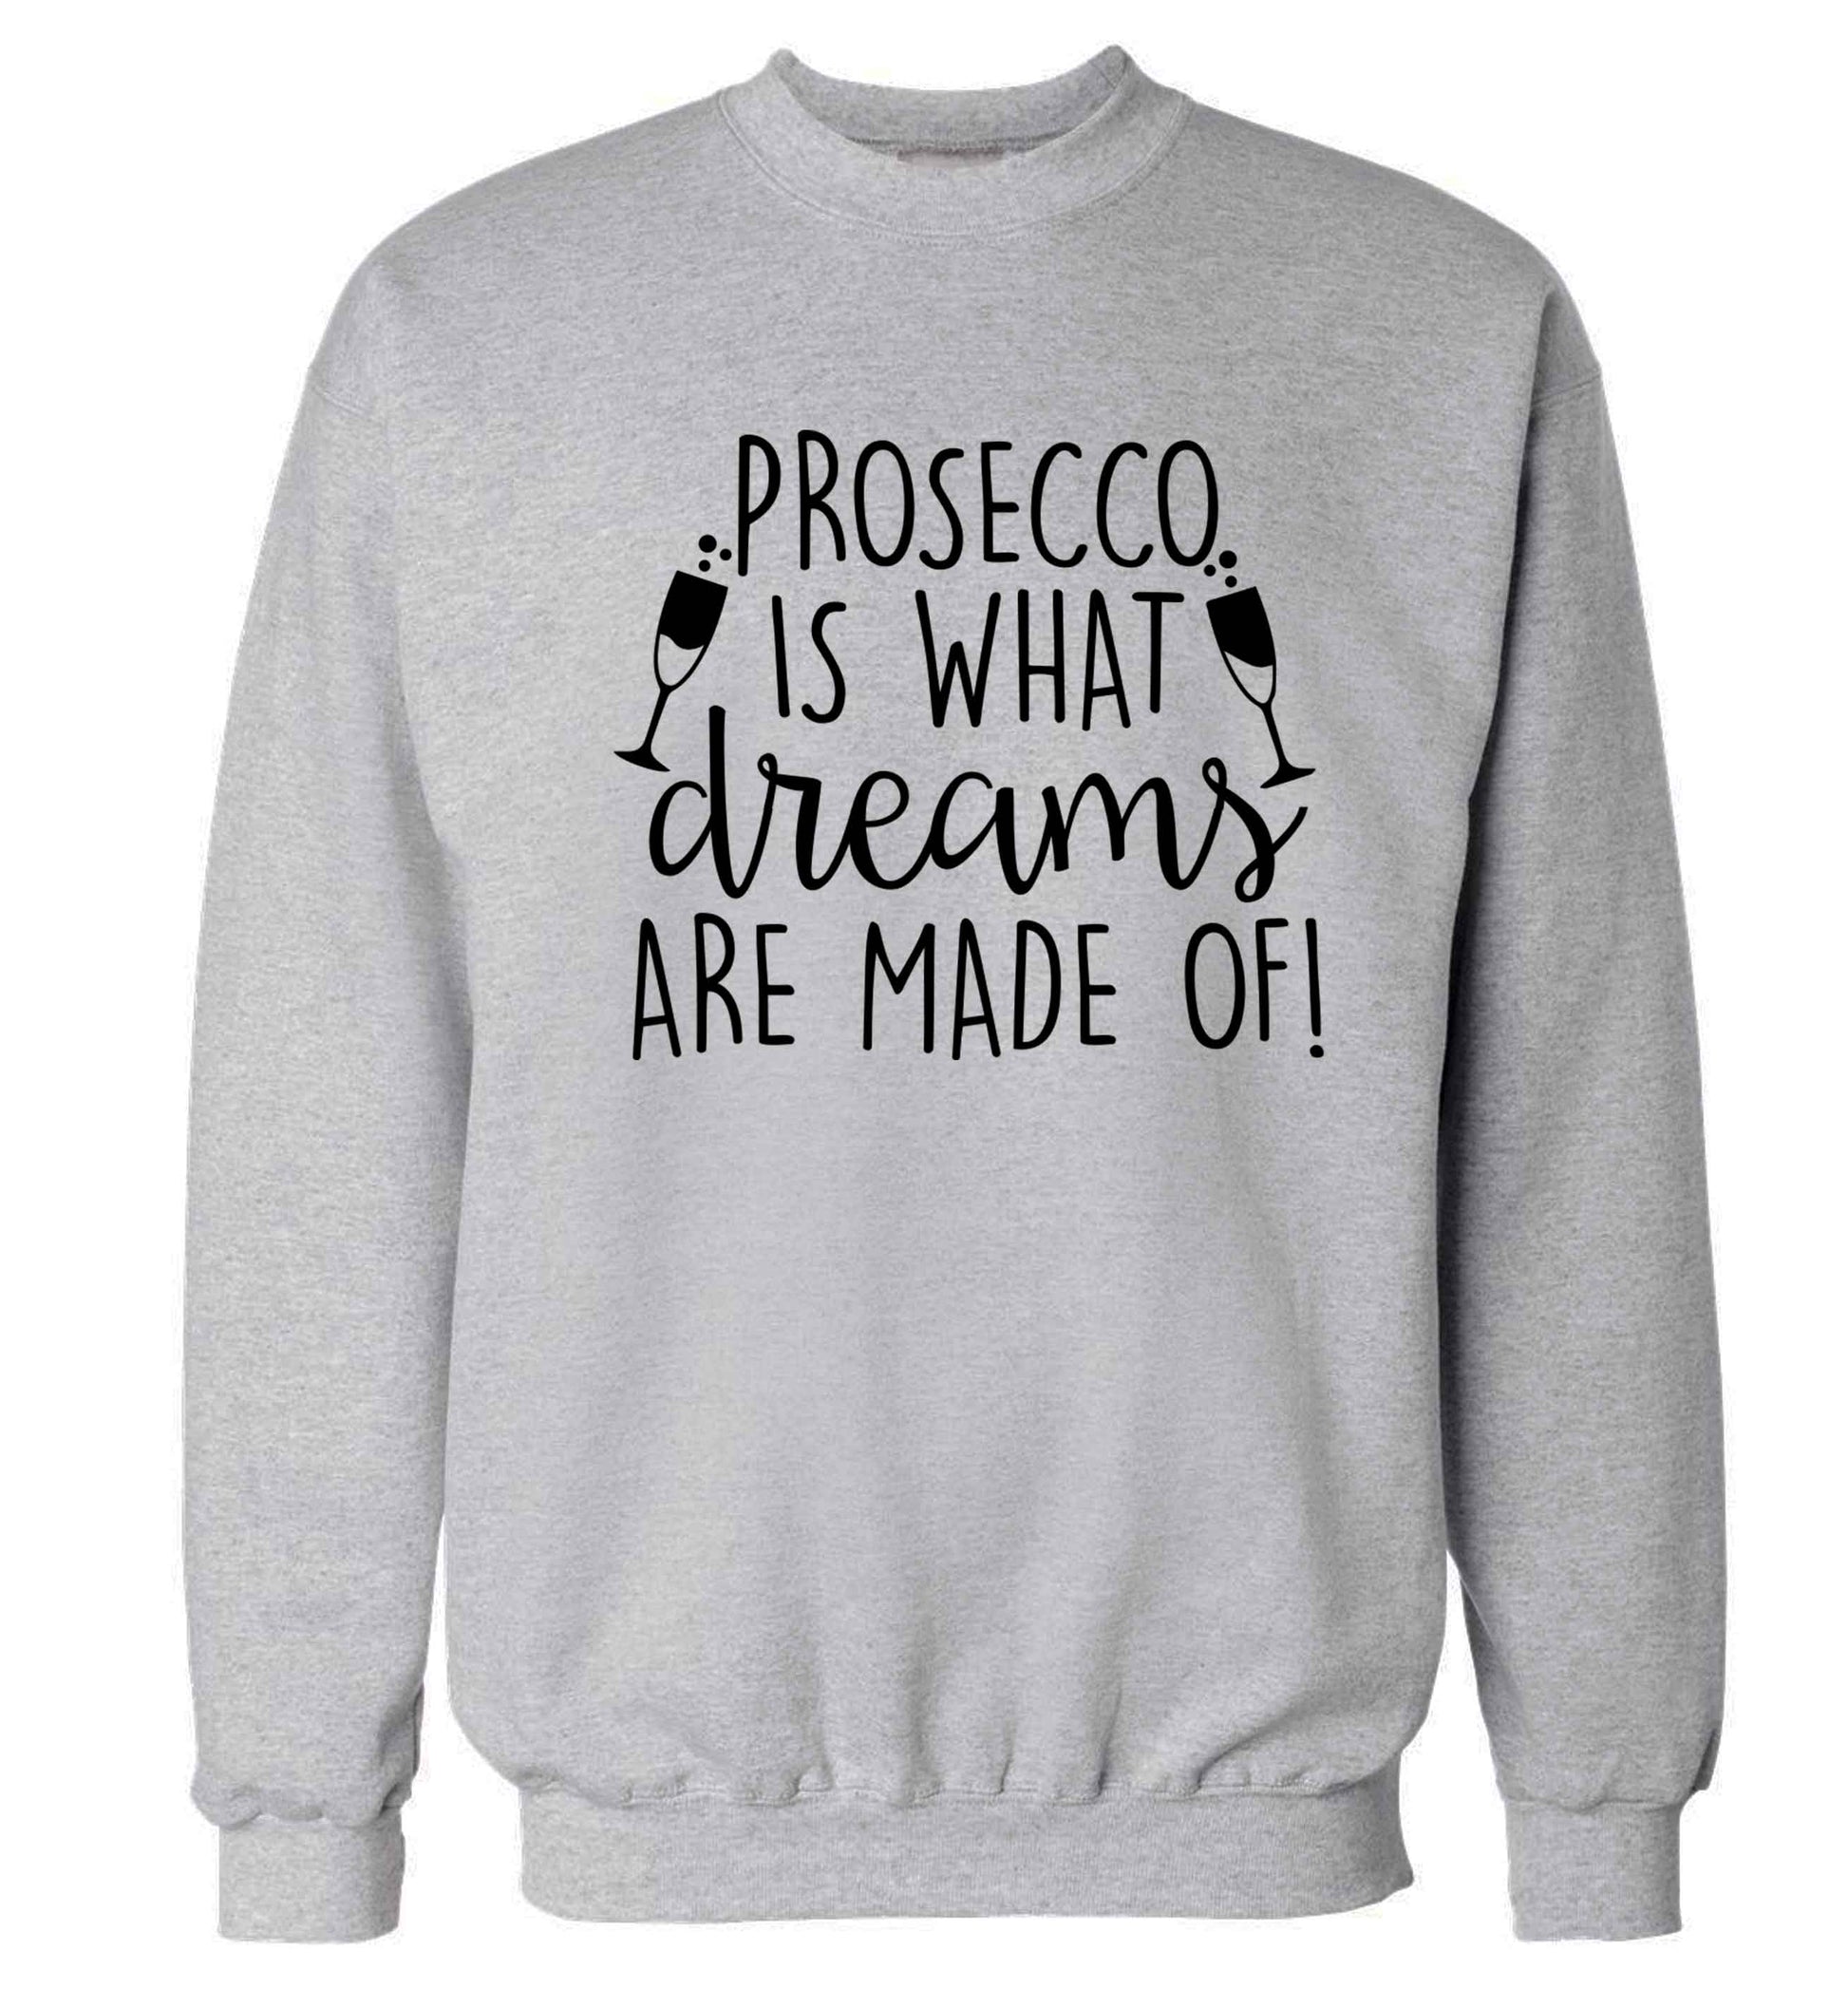 Prosecco is what dreams are made of Adult's unisex grey Sweater 2XL